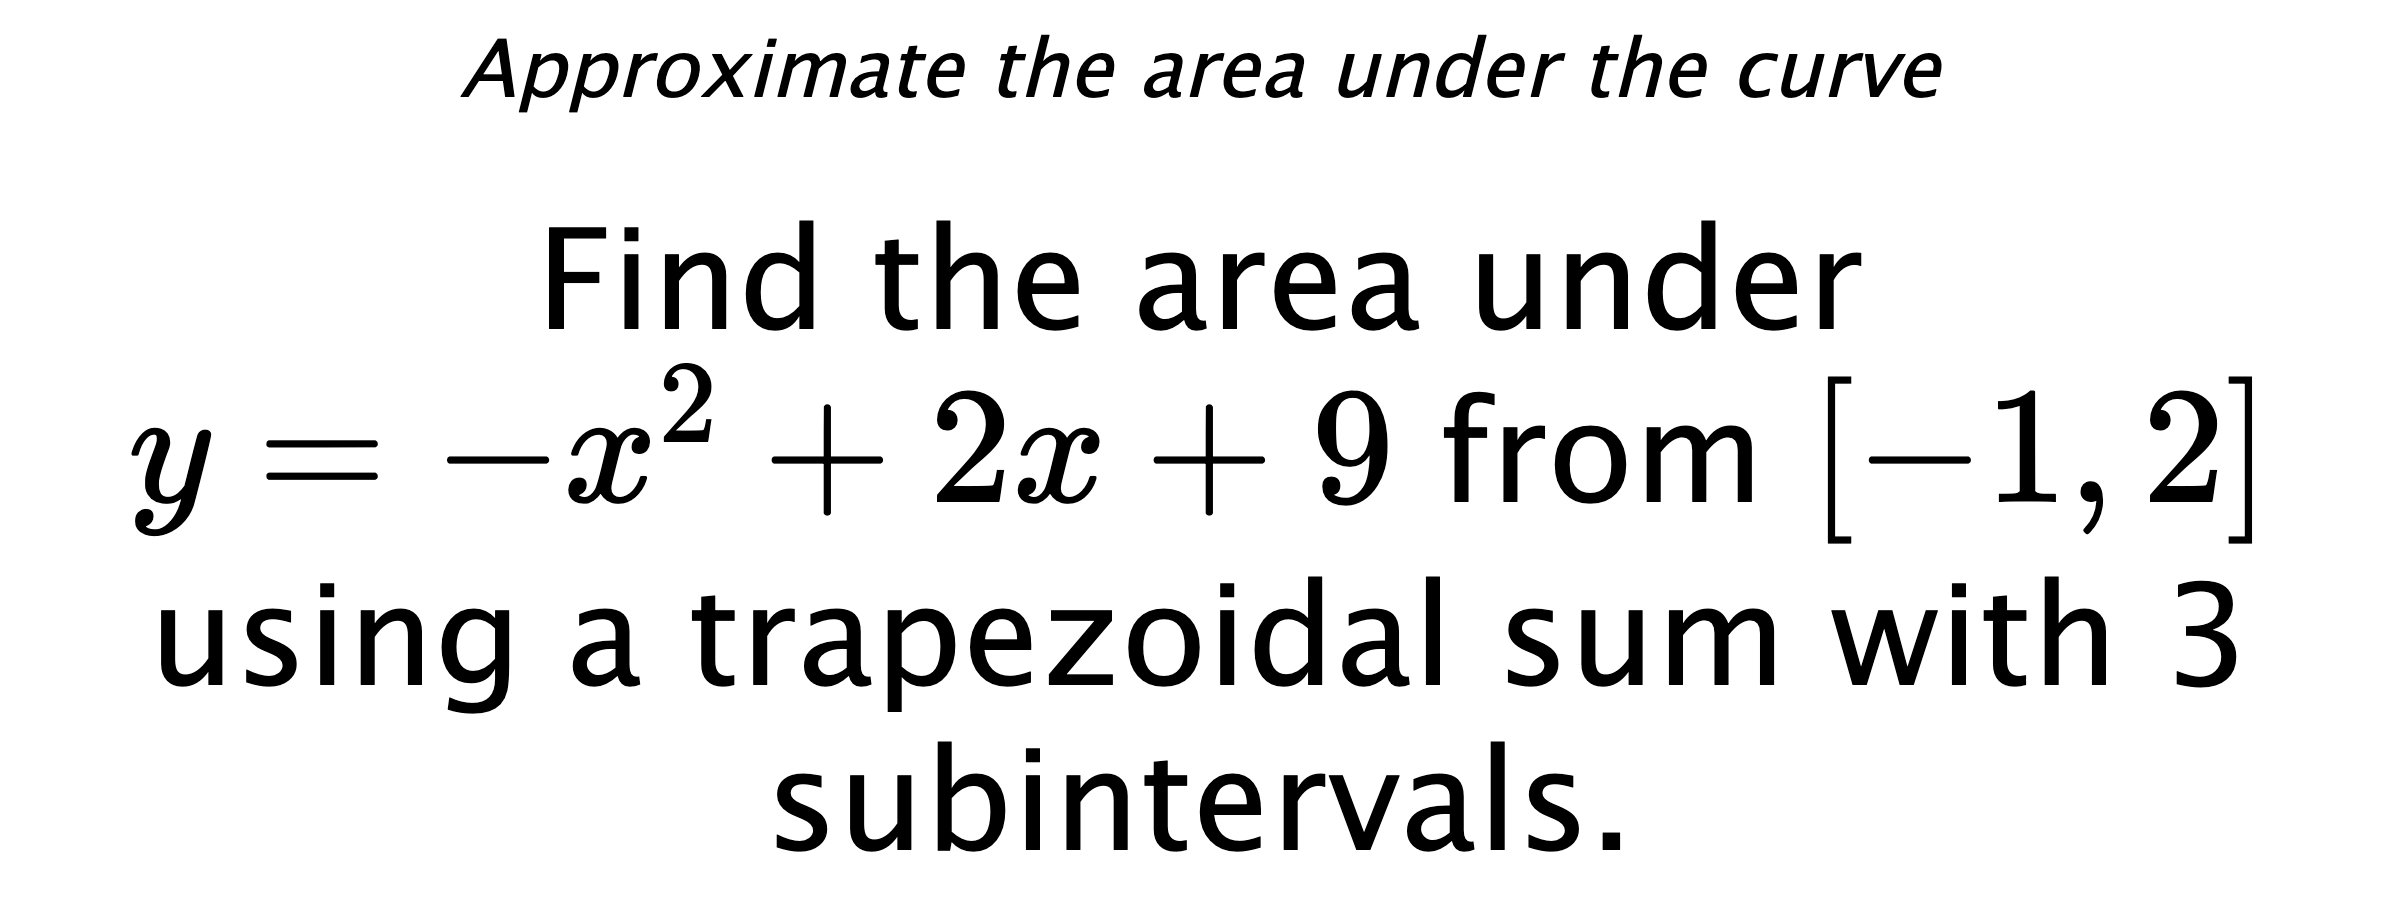 Approximate the area under the curve Find the area under $ y=-x^2+2x+9 $ from $ [-1,2] $ using a trapezoidal sum with 3 subintervals.